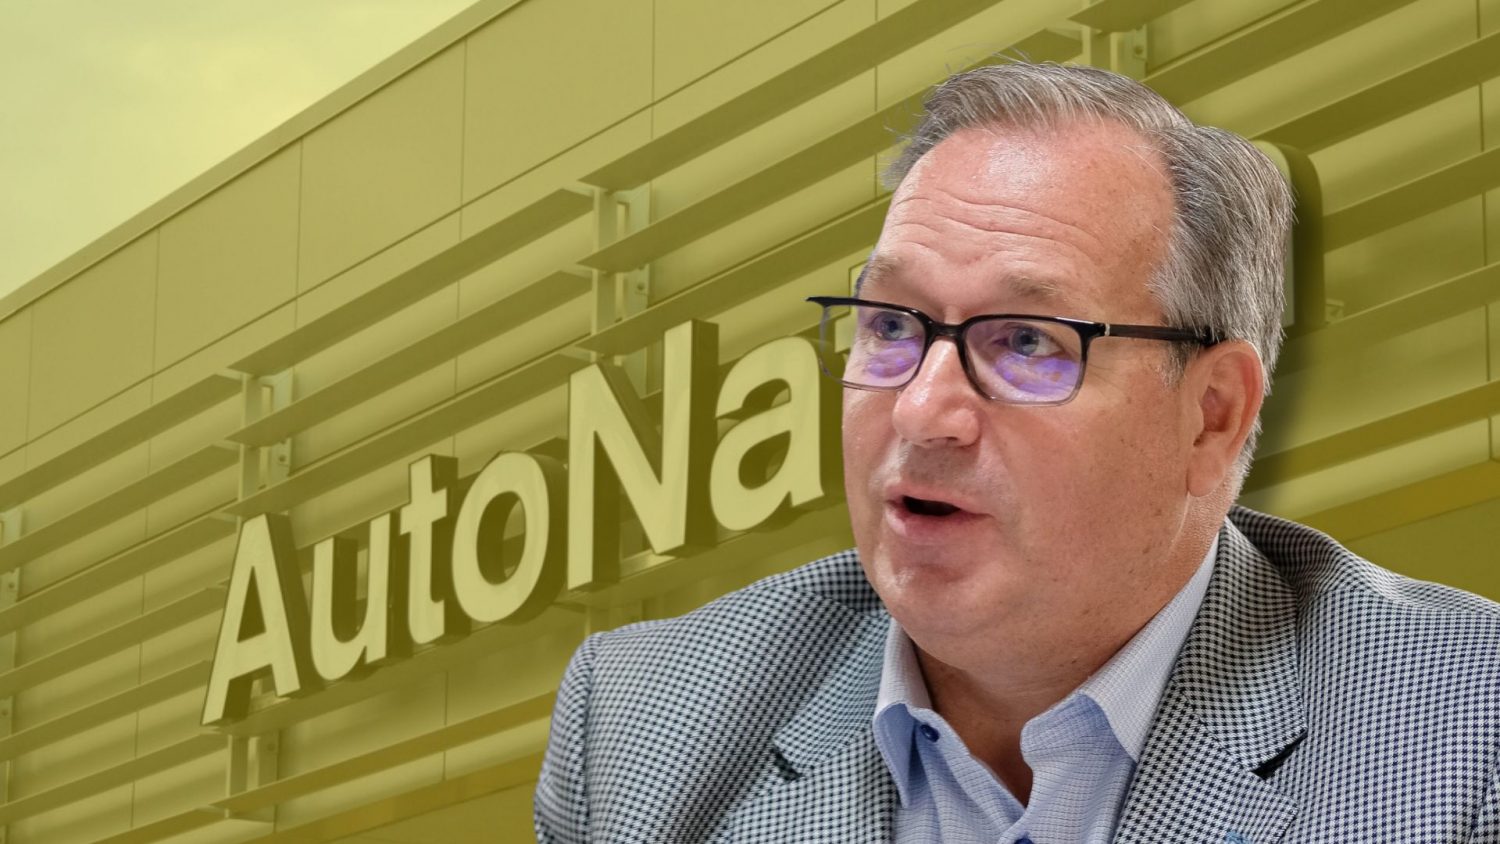 AutoNation has joined other top U.S. dealership groups in a bidding war for Pendragon, the U.K.'s second largest auto retailer.